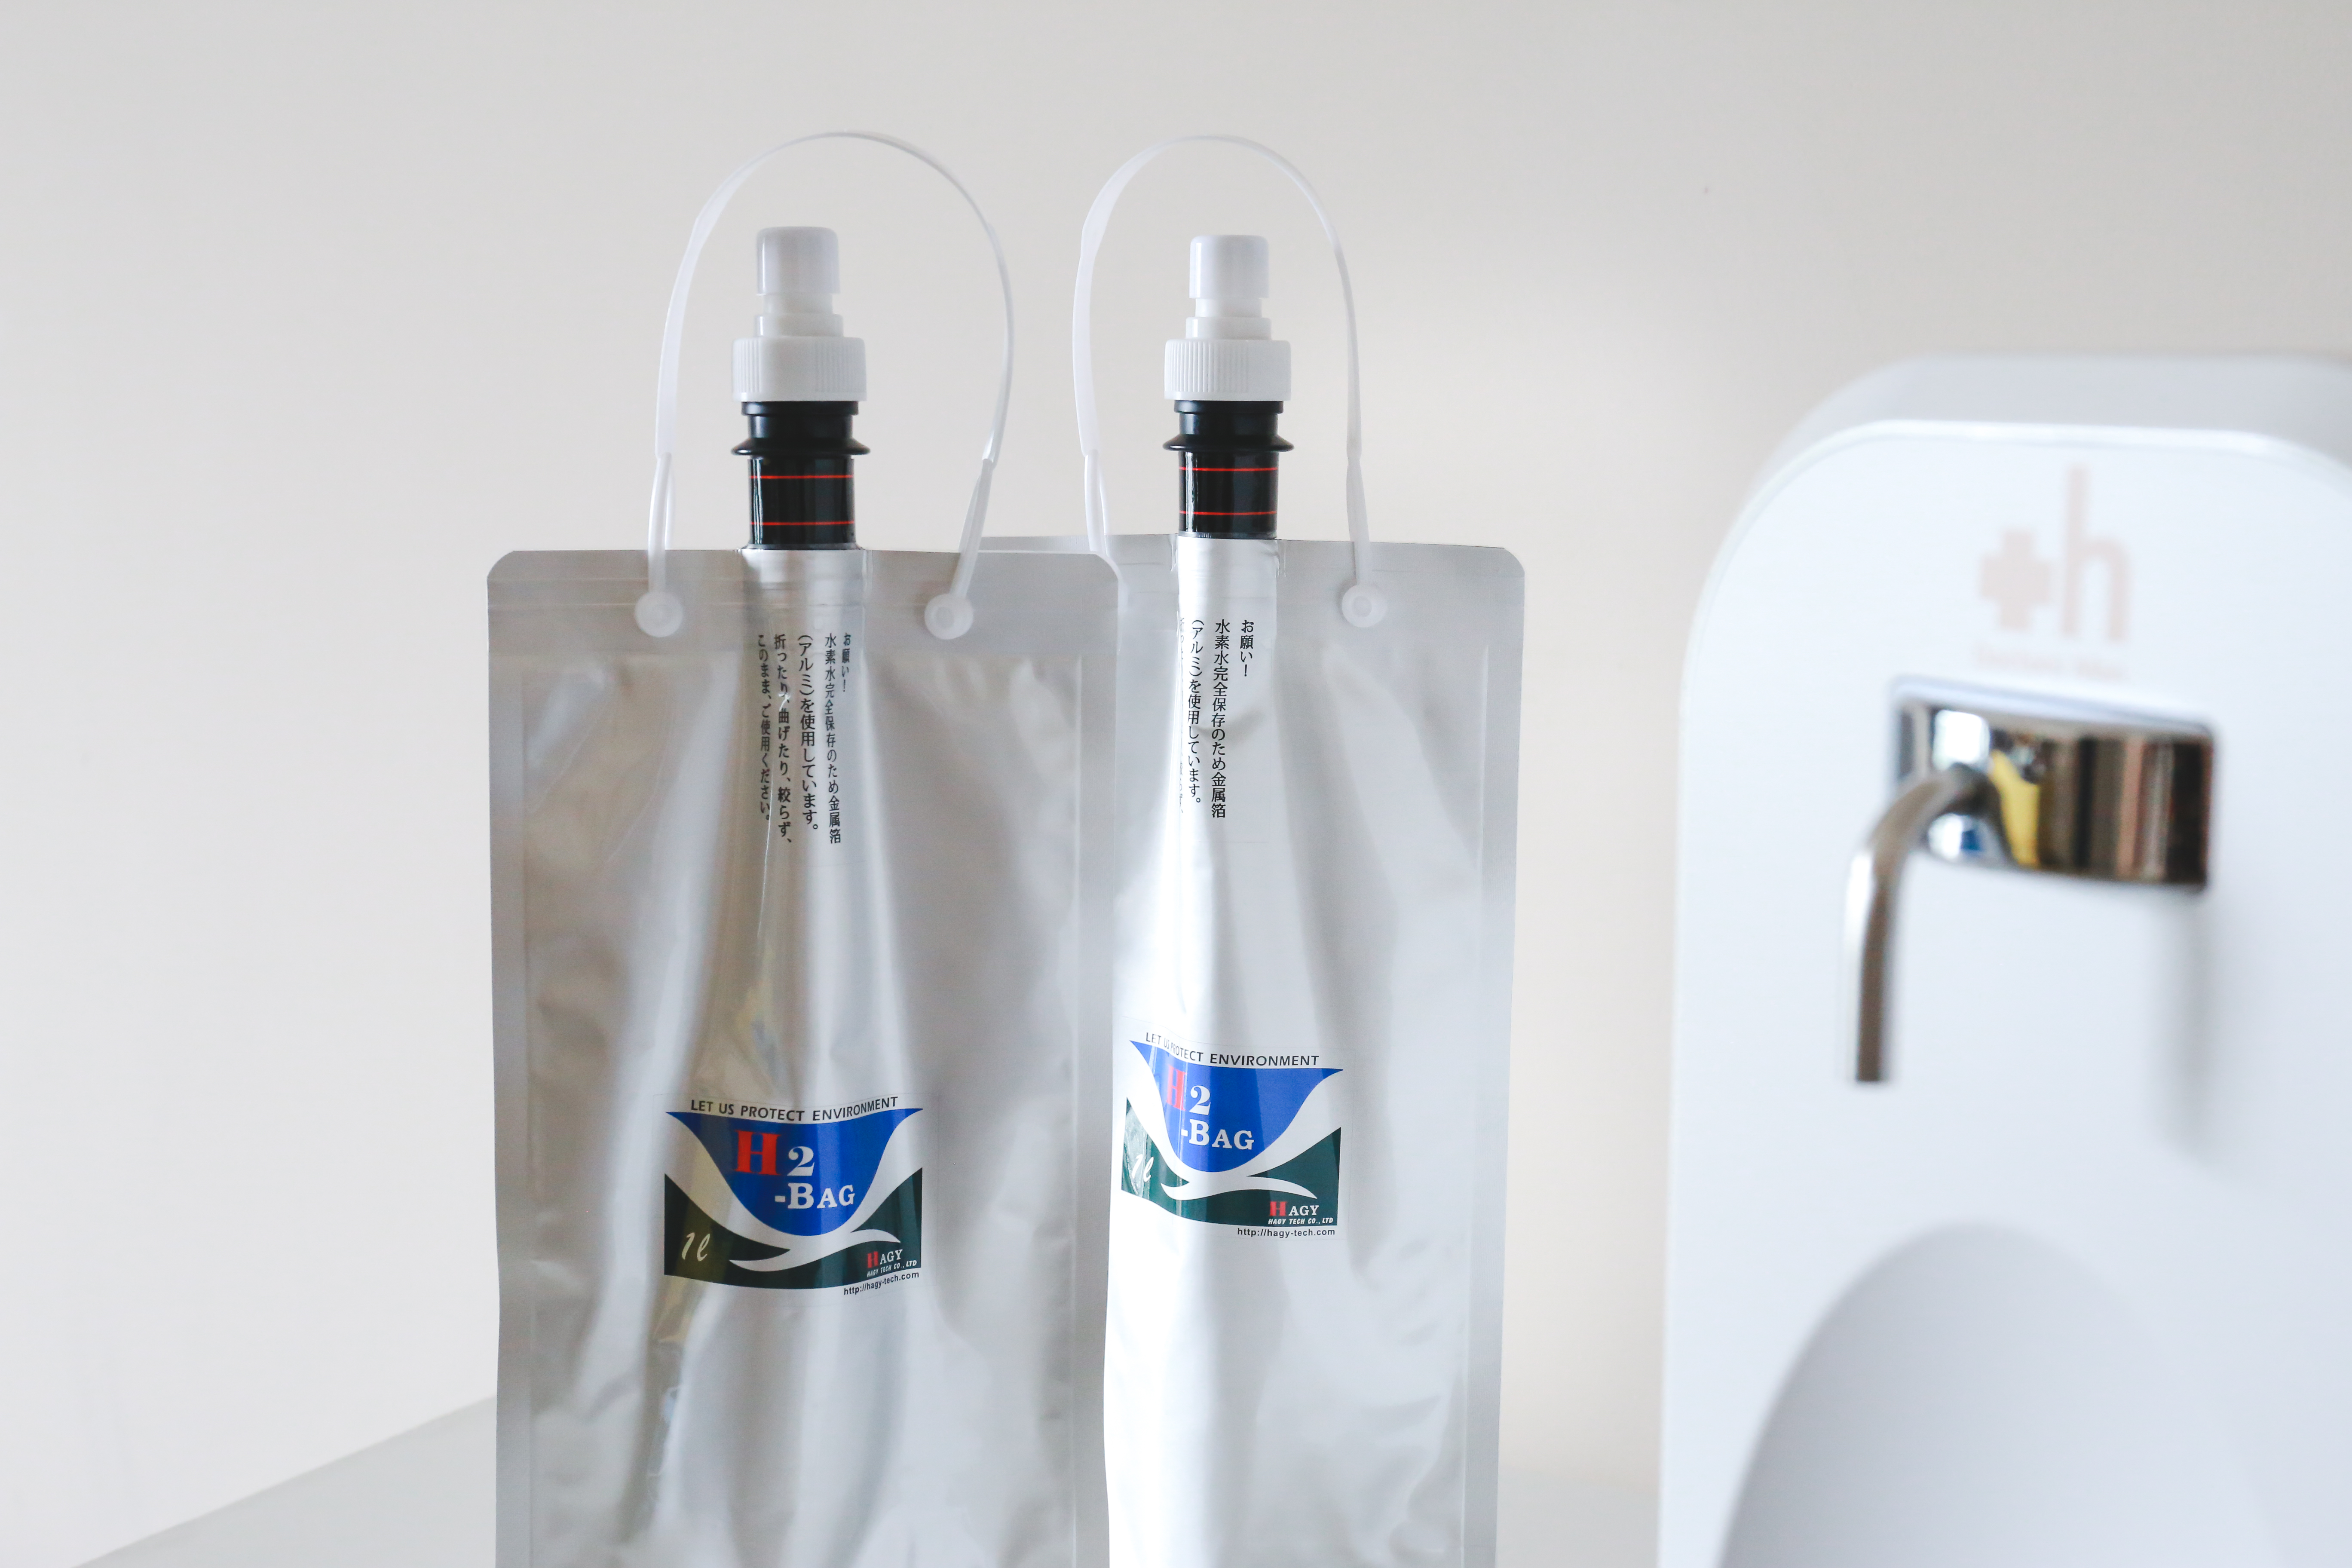 Going out with high-concentration Hydrogen Water in your bag!